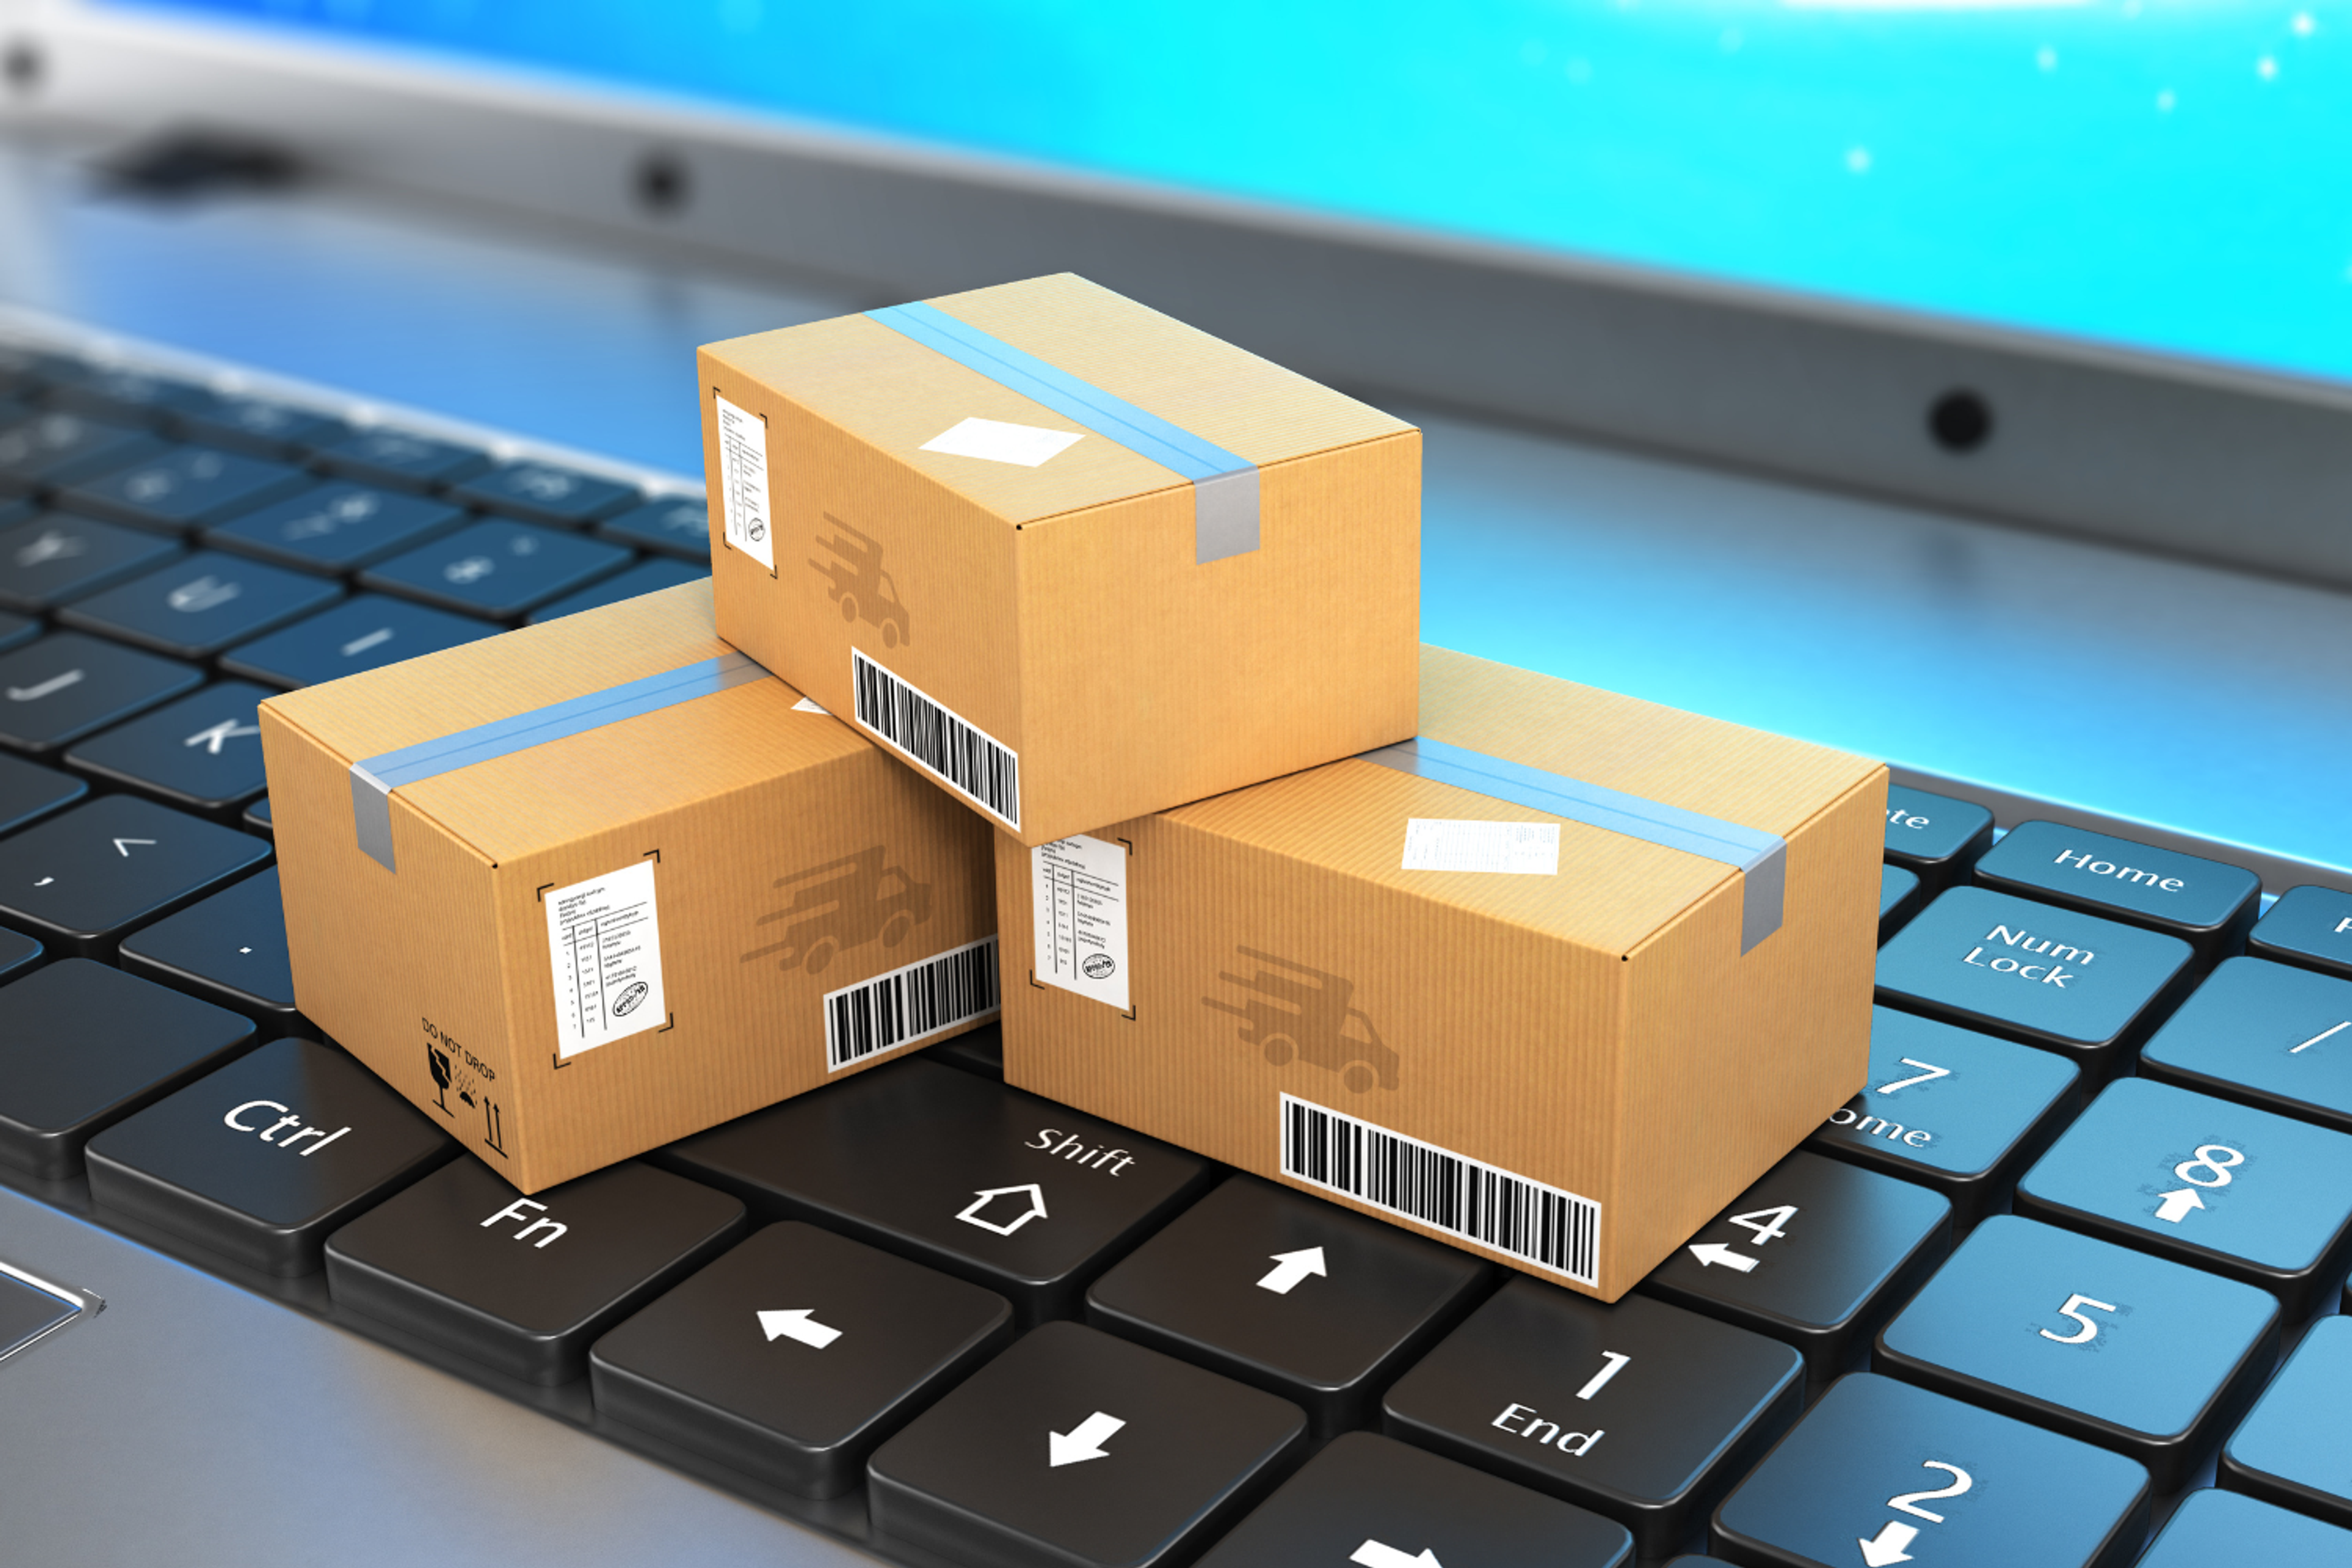 An image of miniature shipment boxes placed on a laptop keyboard